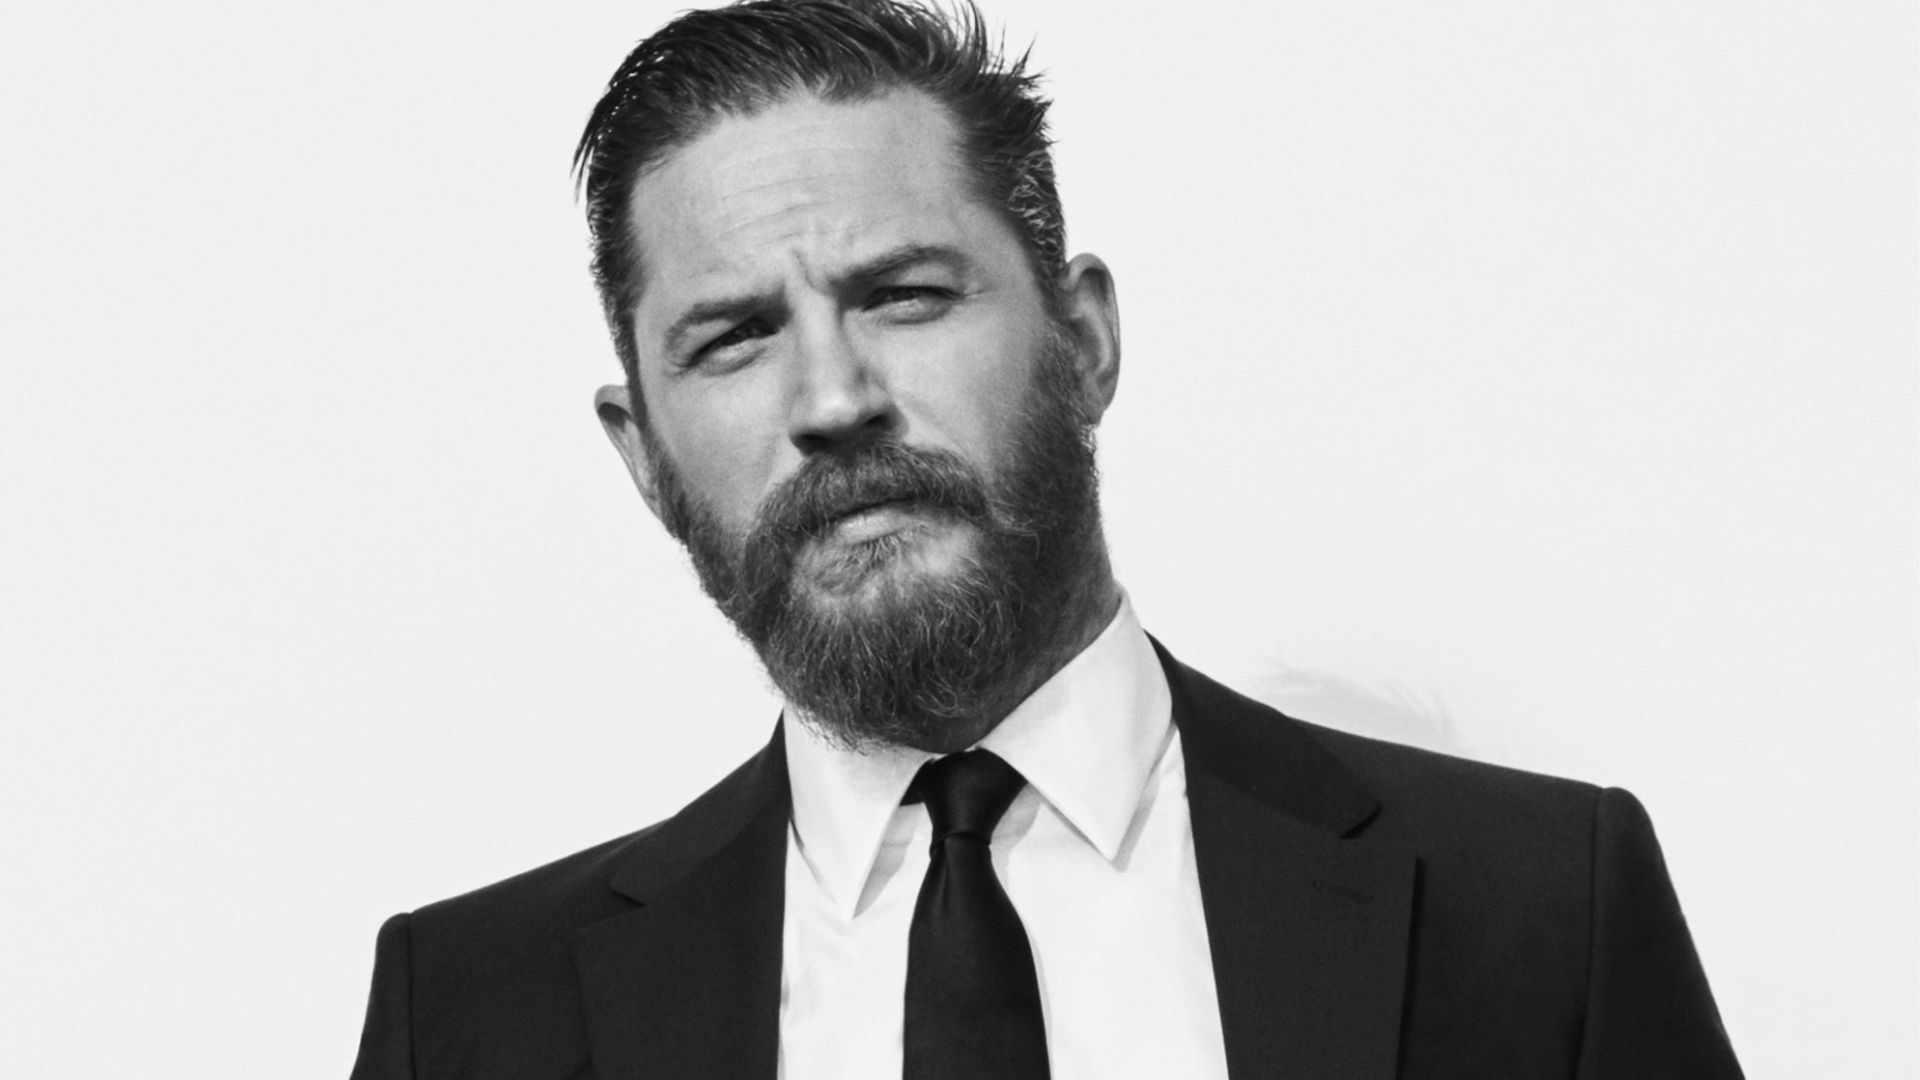 Tom Hardy - An English Actor, Producer, Writer And Former Model